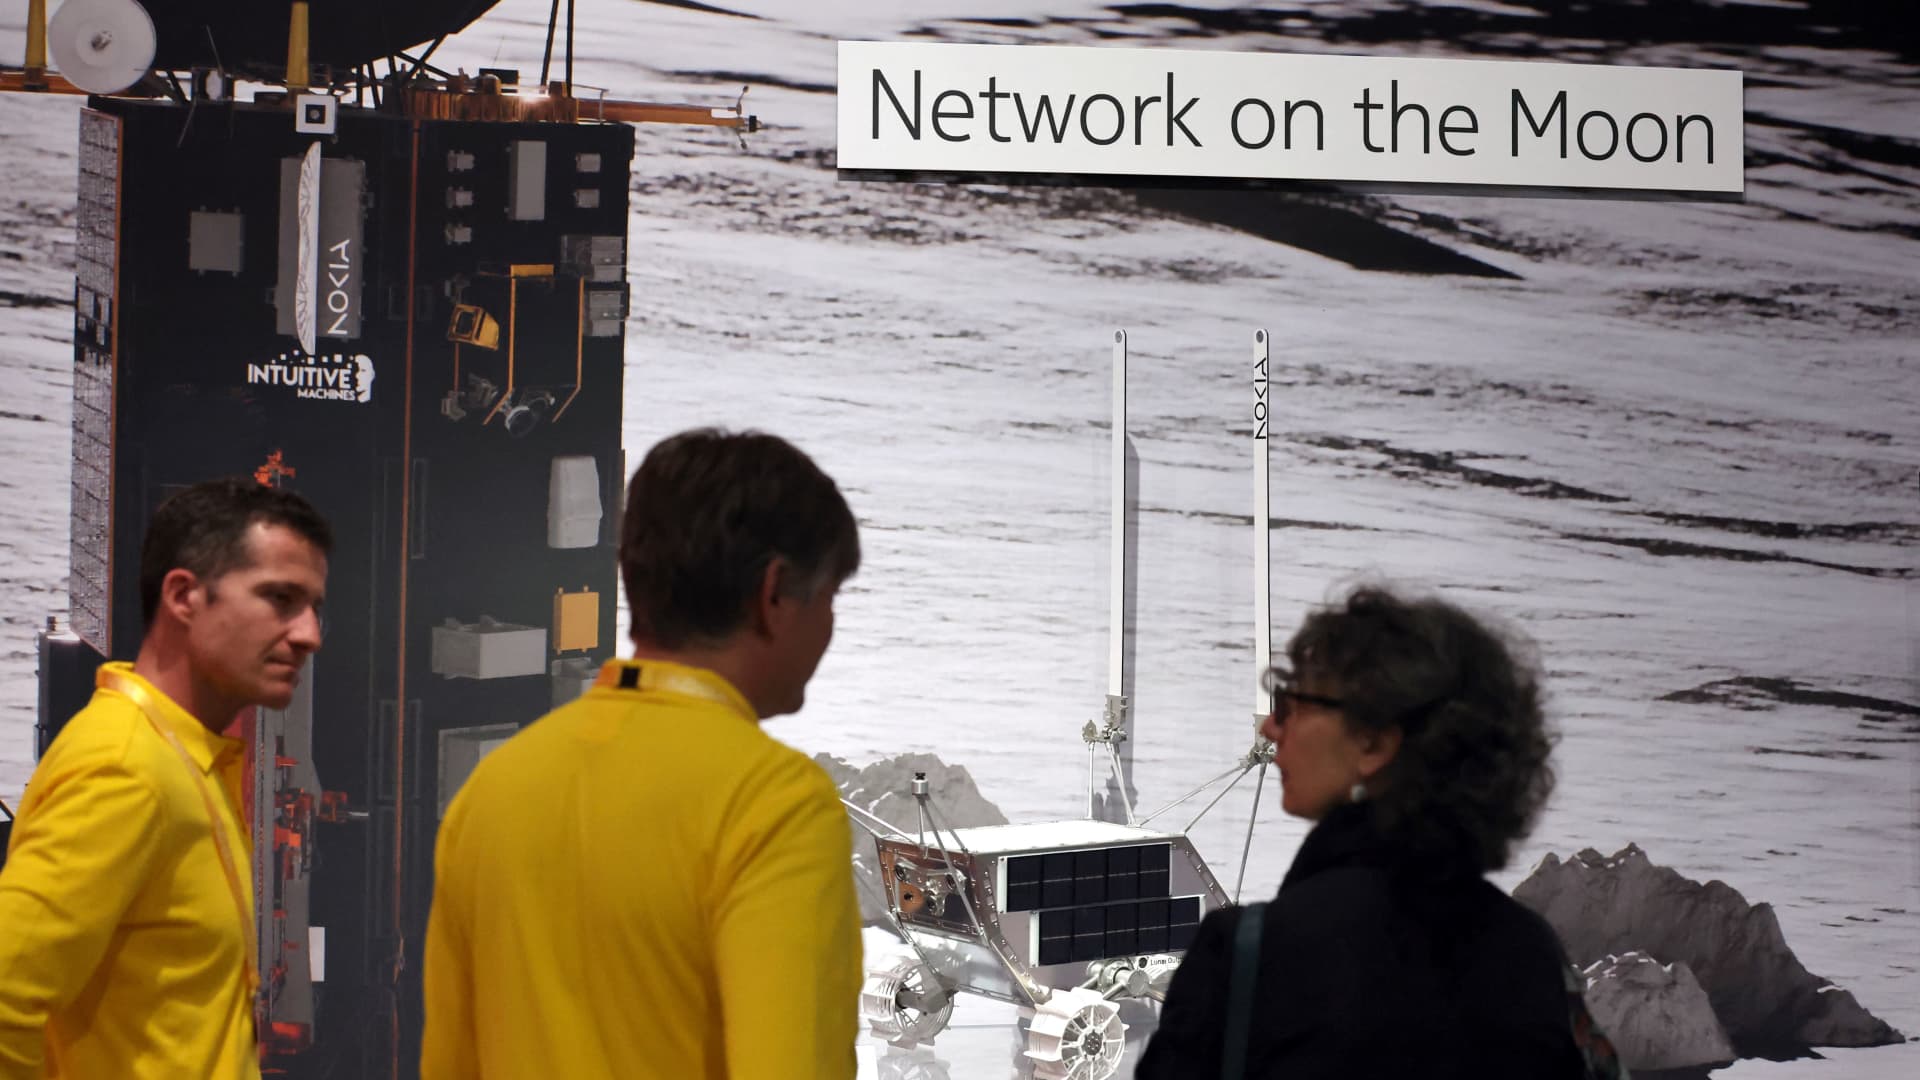 4G internet is disclose to advance on the moon later this year